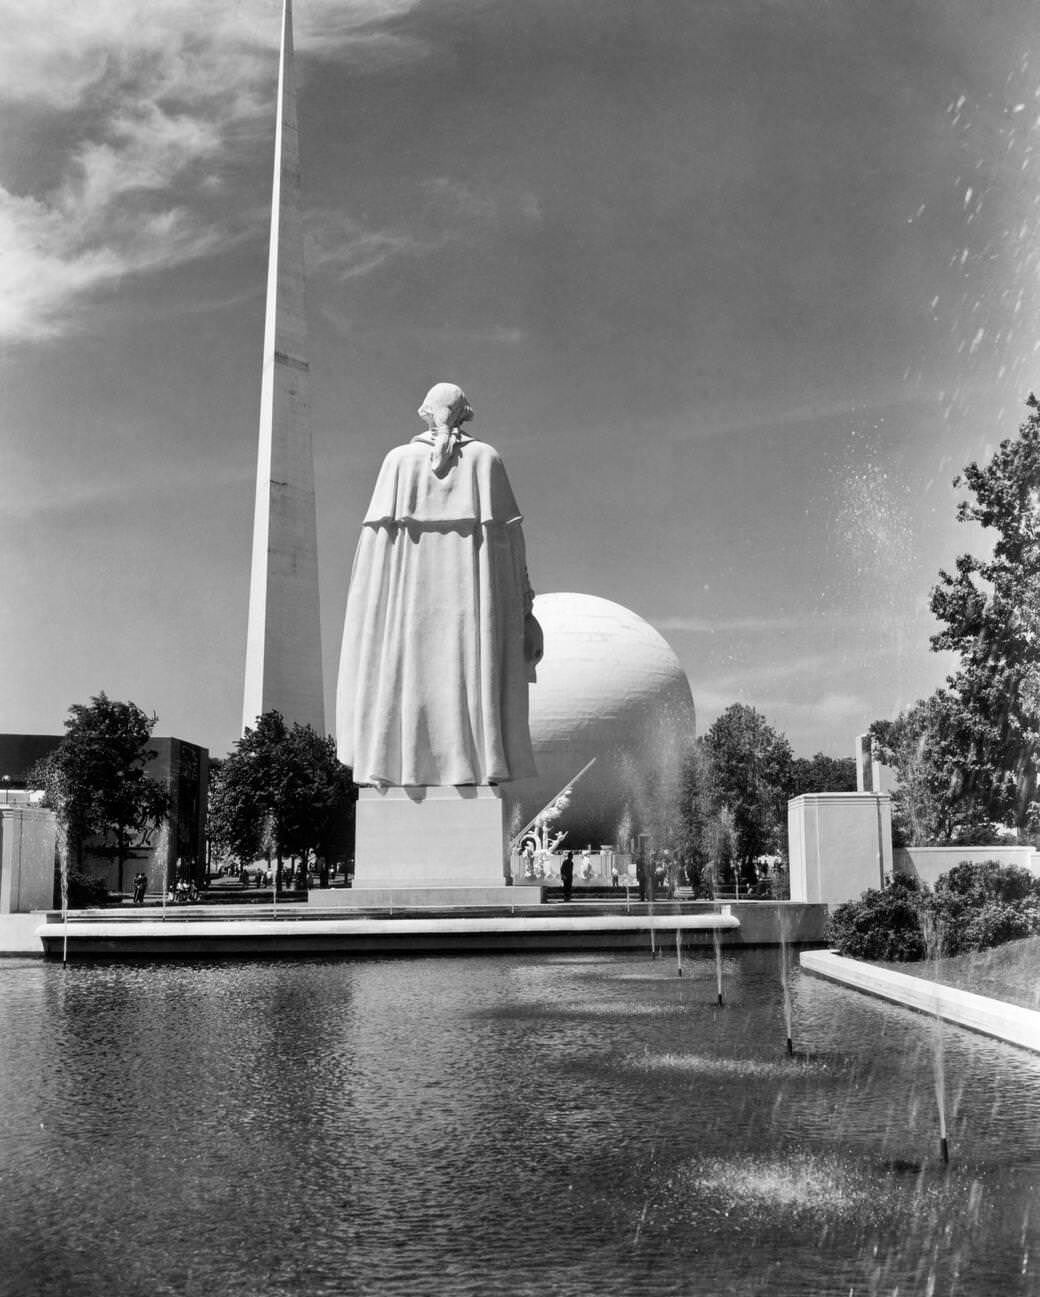 The 1939 World'S Fair Constitution Mall Pond With Statues And The Trylon And Perisphere In The Background, 1939.